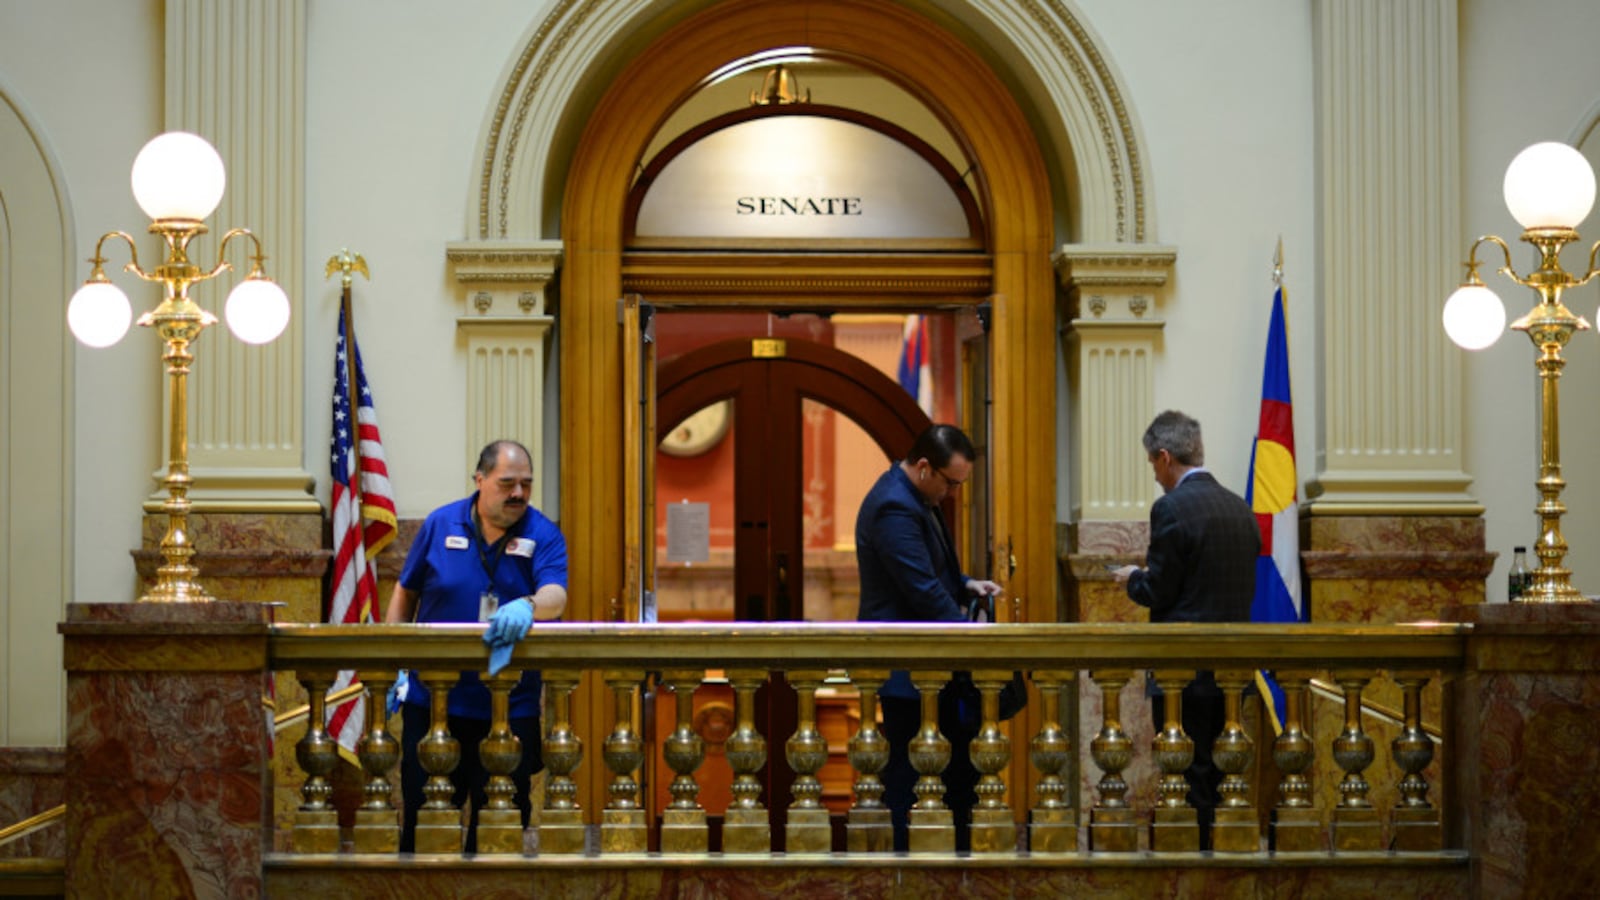 Janitor Chris Martinez, left, wipes down the handrails outside the Senate in the Colorado State Capital building in Denver, Colorado on March 13, 2020.